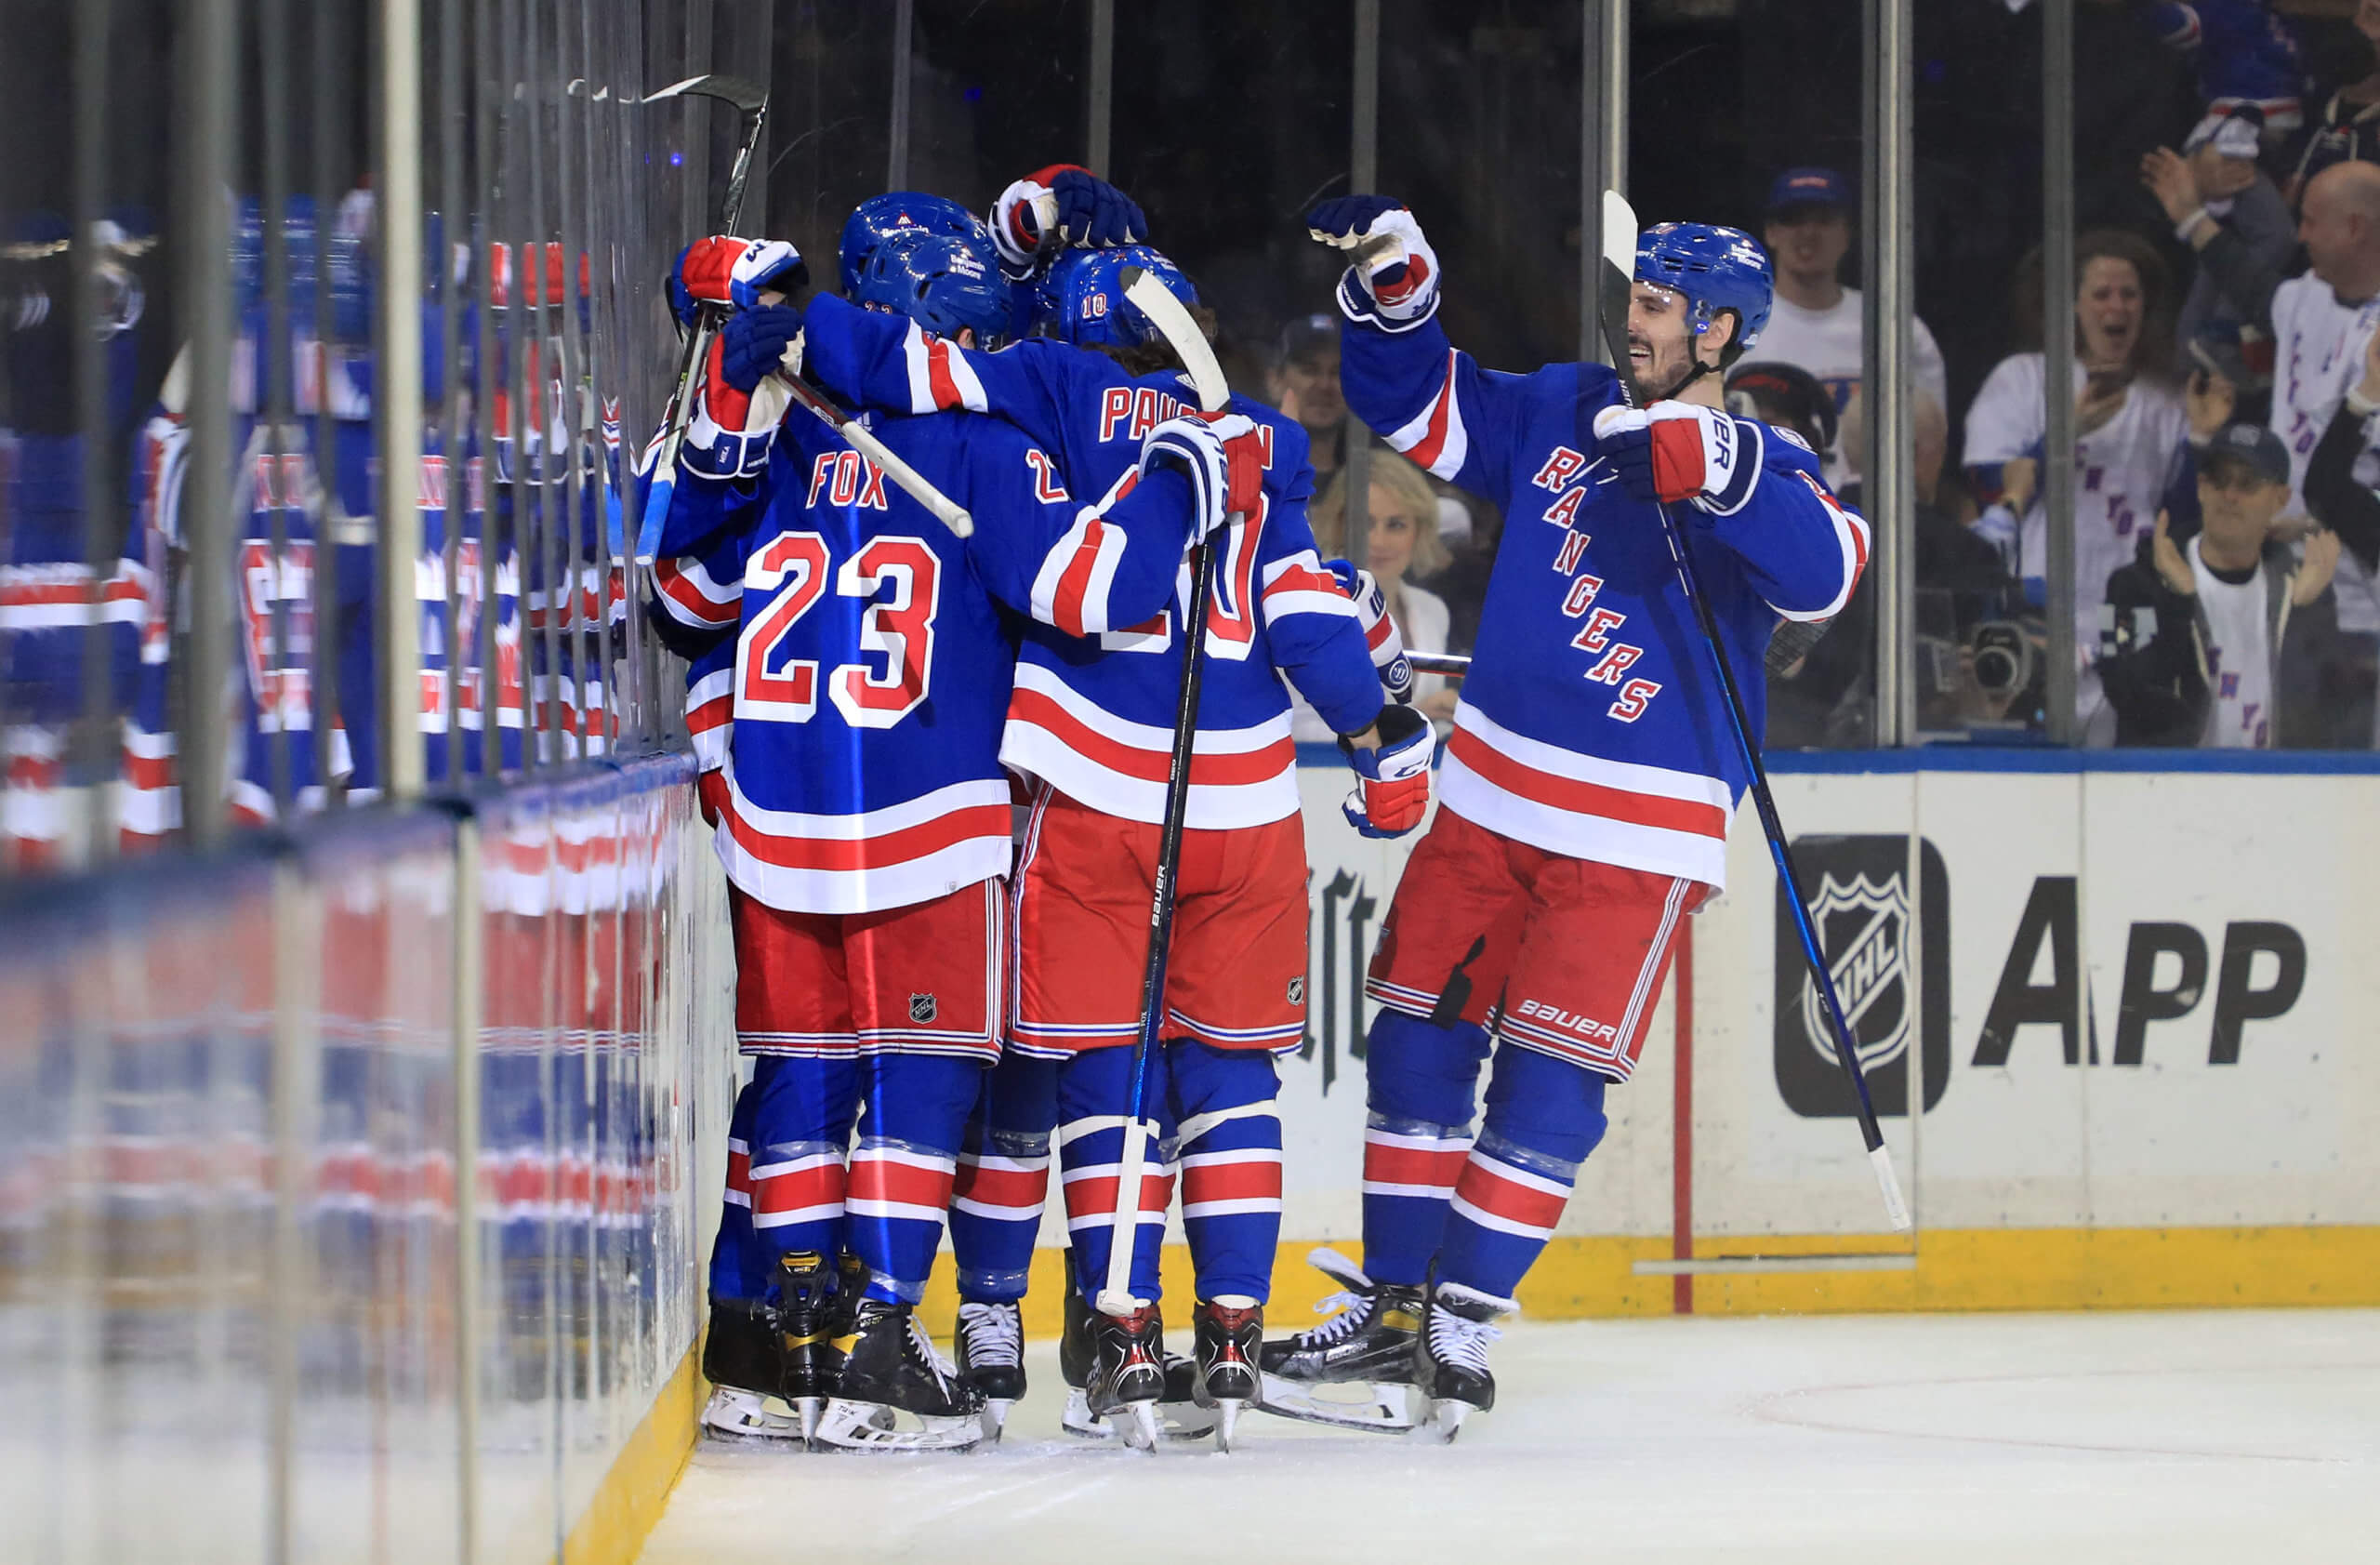 New York Rangers take series lead over Montreal Canadiens on Mika